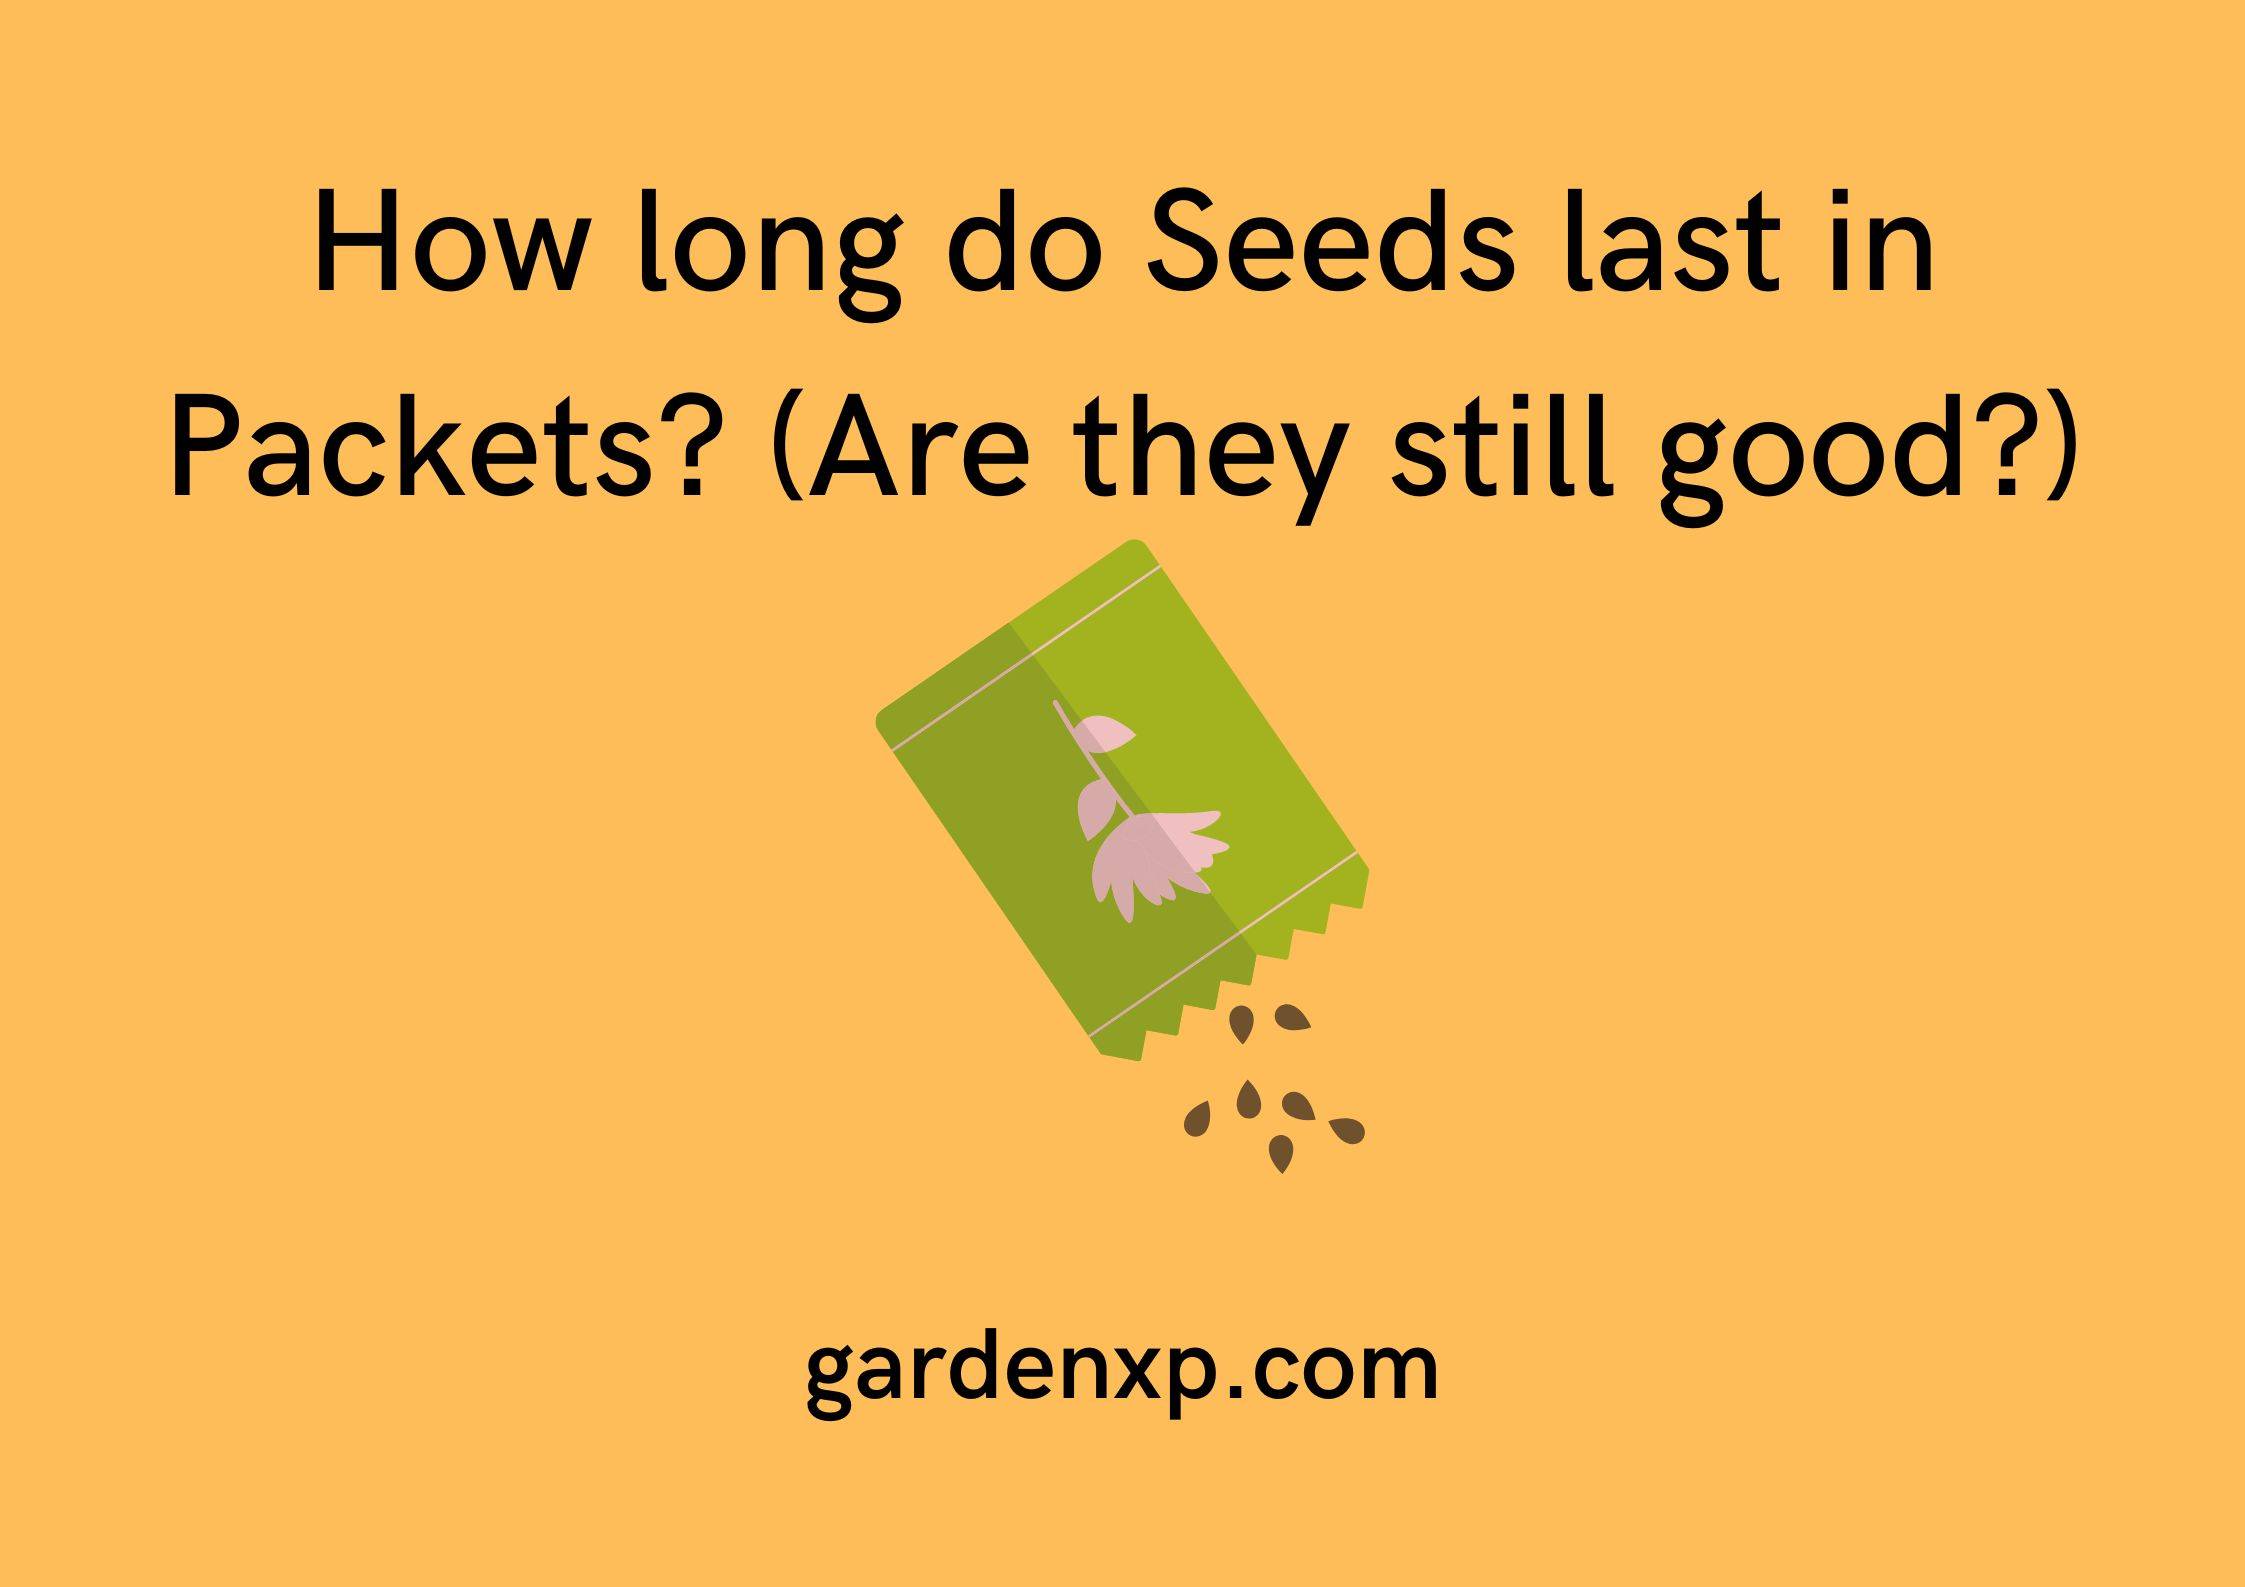 How long do Seeds last in Packets? (Are they still good?)